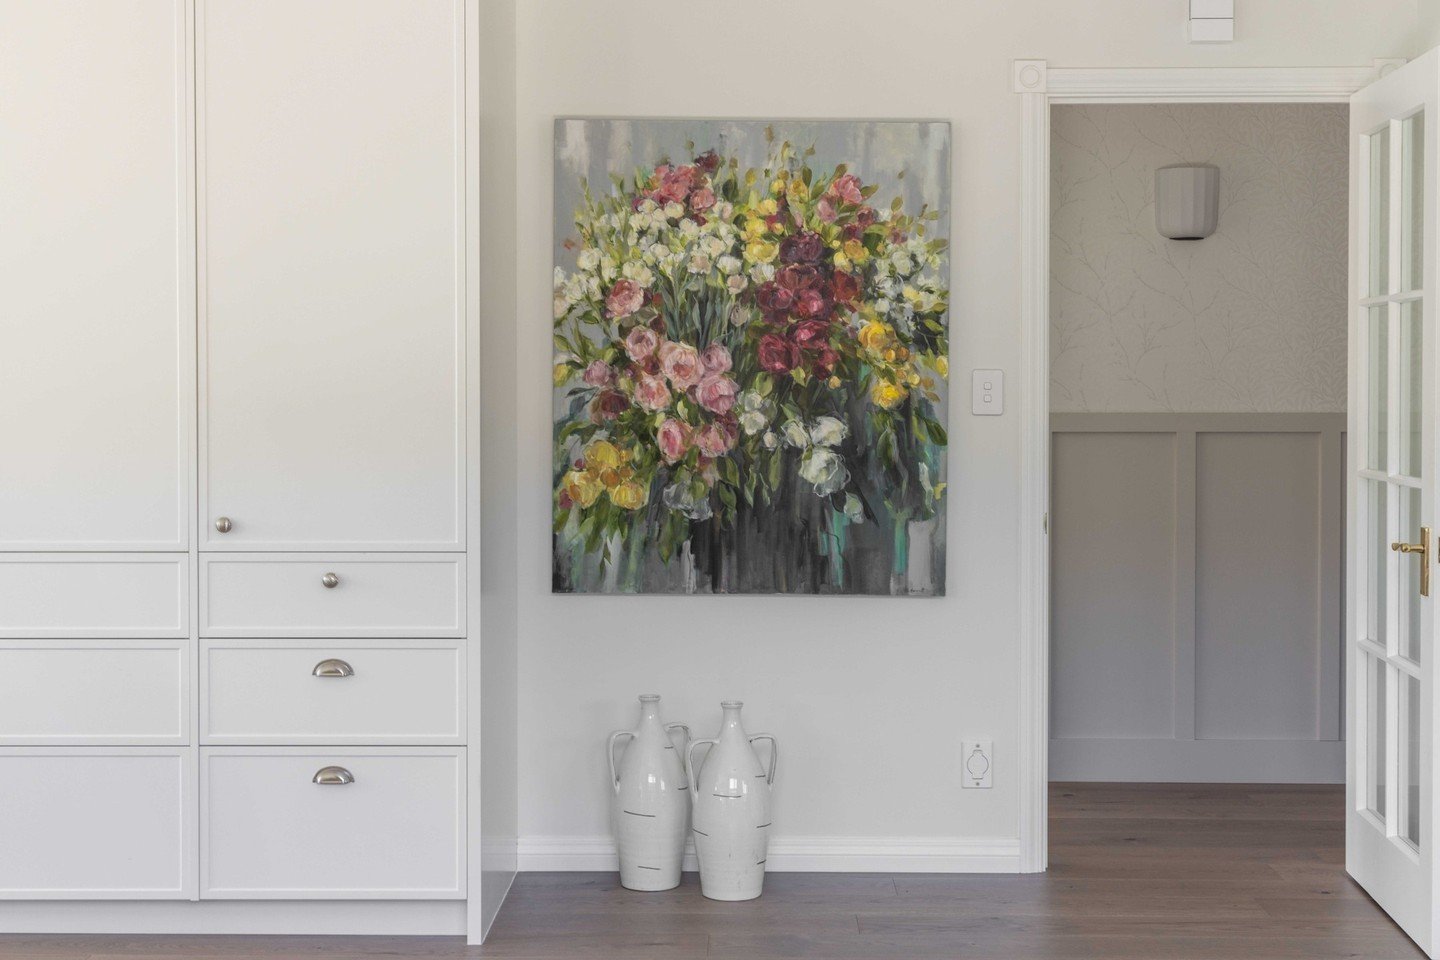 Loving this gorgeous pop of colour by #melaniehammettart in one of our recent renovations. ⁠
The colours complement the serenity of the colour scheme and bring interest to this space 💐⁠
⁠
📷️ @hazelredmond_⁠